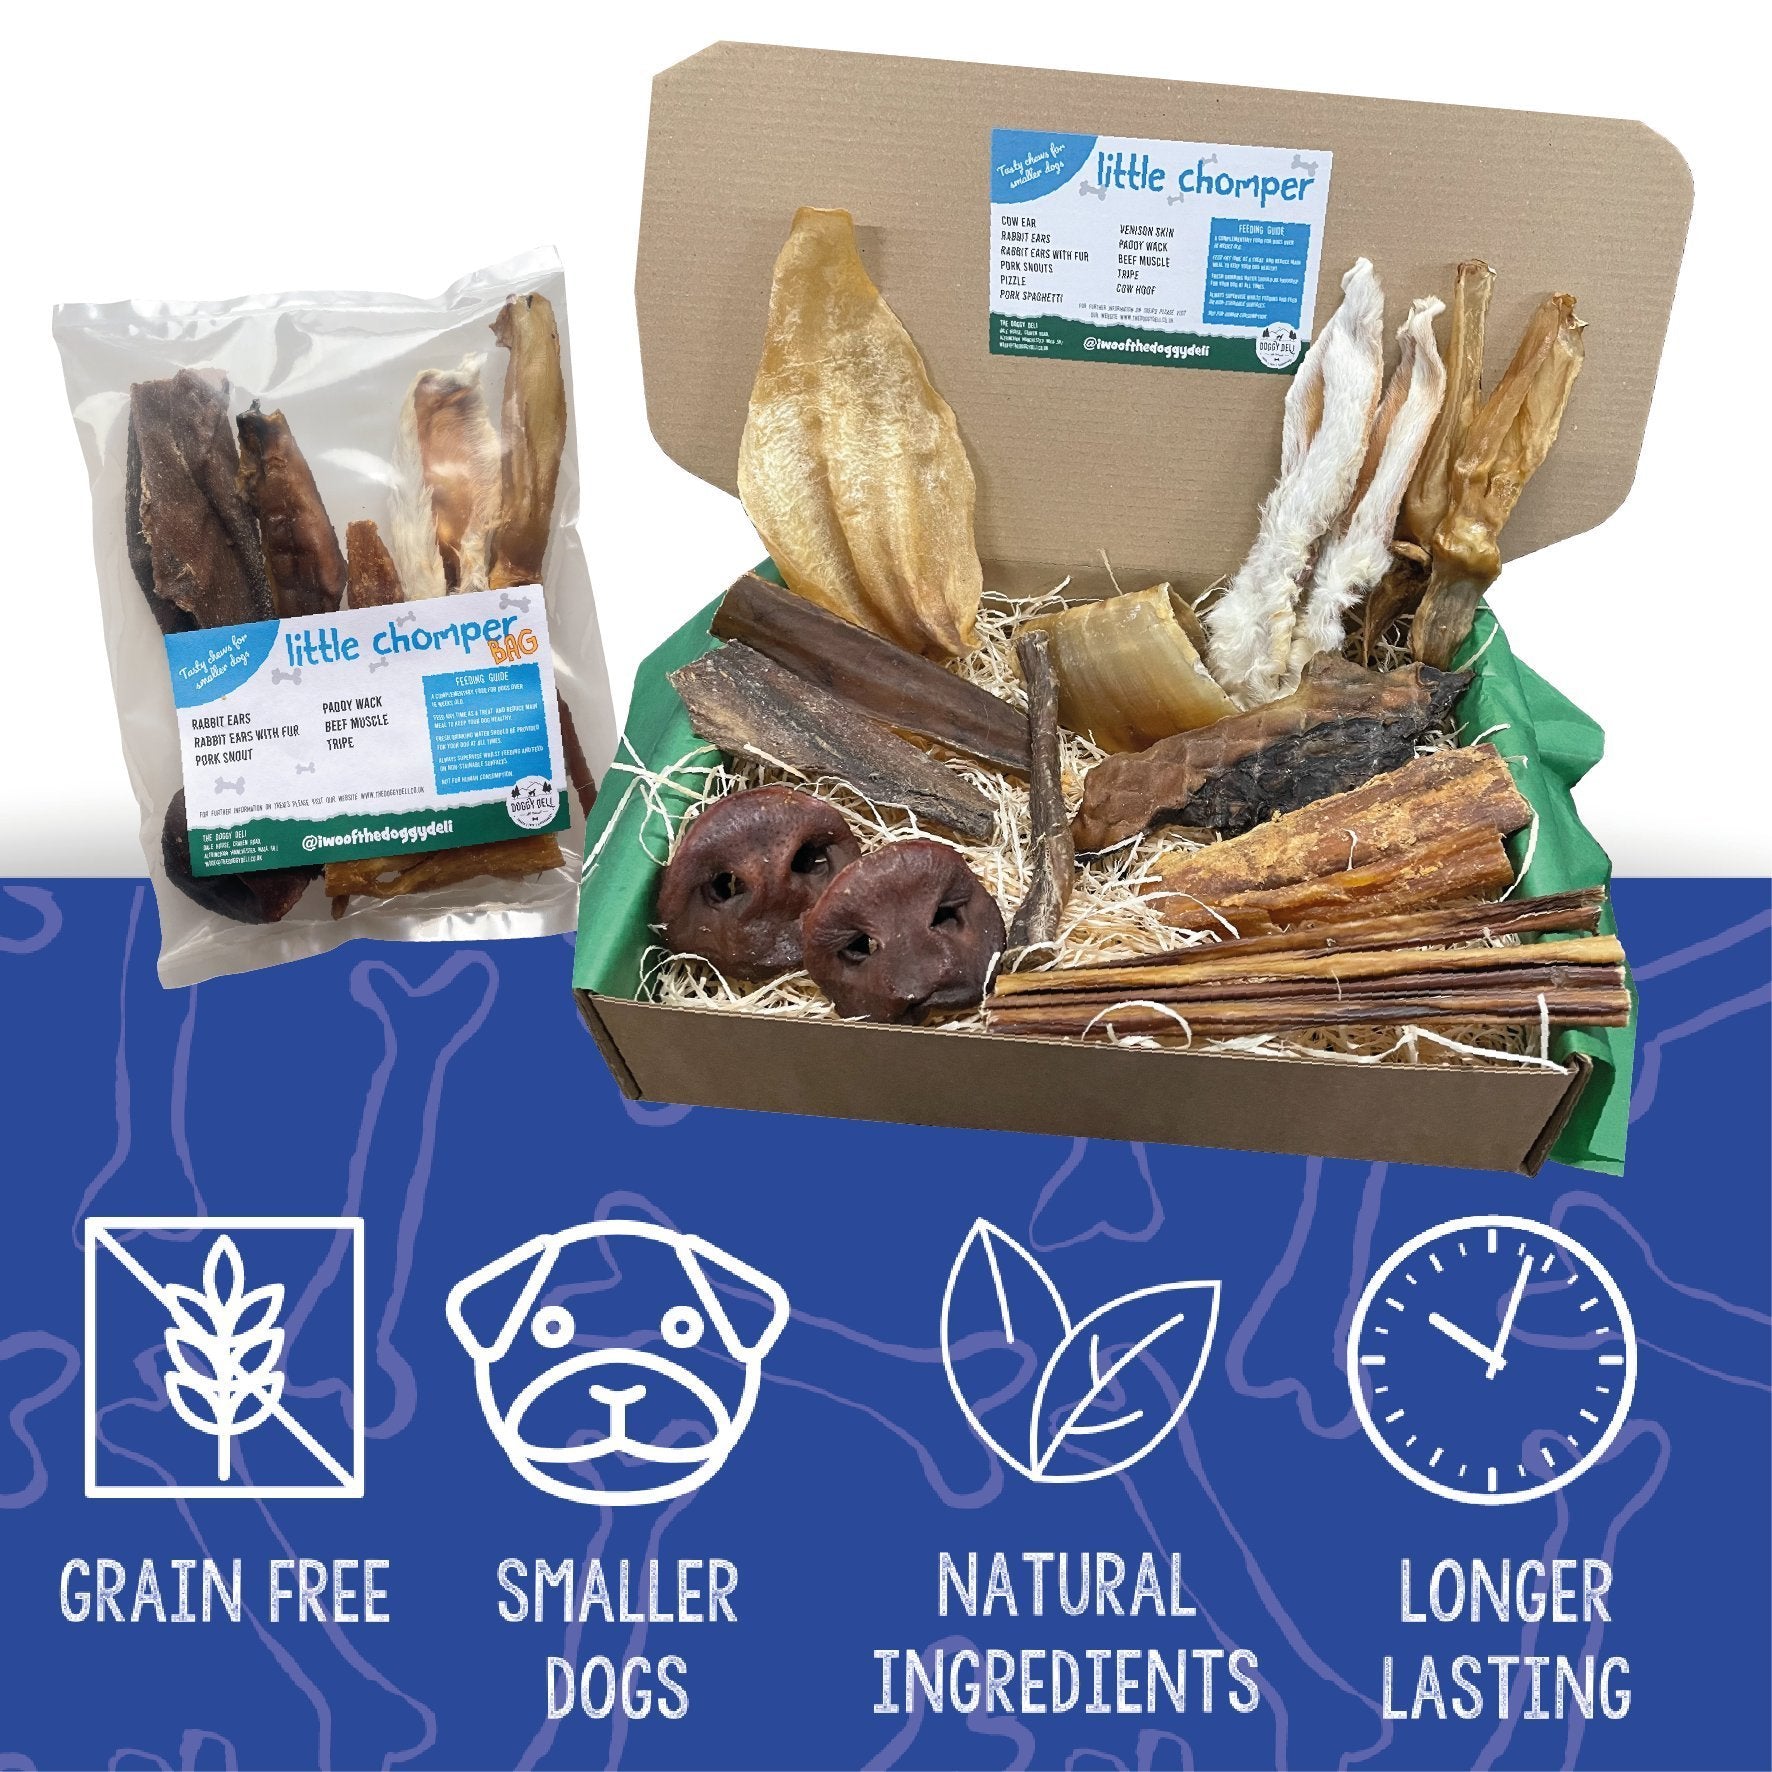 Little Chomper - The Big Box for Smaller Dogs! Natural Treat Selection Box and Bags for Smaller - Medium Dogs | The Doggy Deli